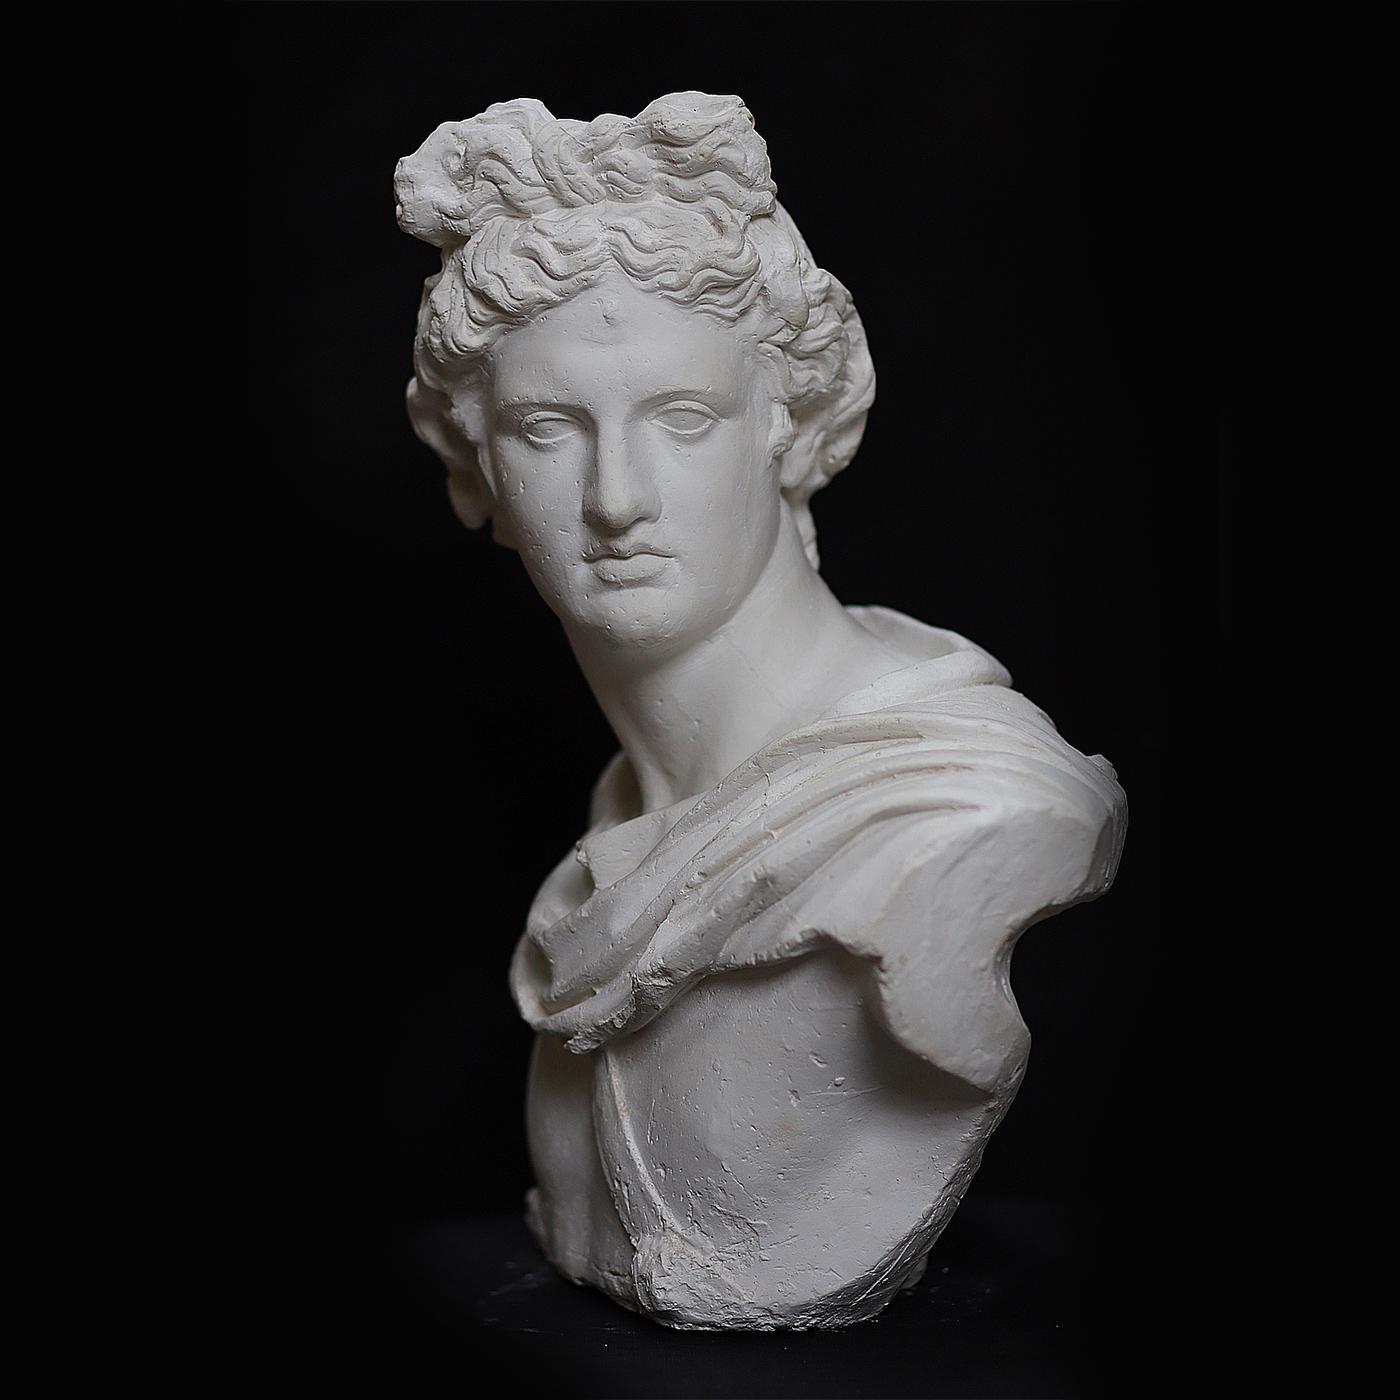 This magnificent bust of Apollo, the Greek god of art, medicine, and music is directly inspired by the Classic marble statues in the Roman tradition. The stunning god appears here in profile, a stern gaze on this handsome face, as he has just killed